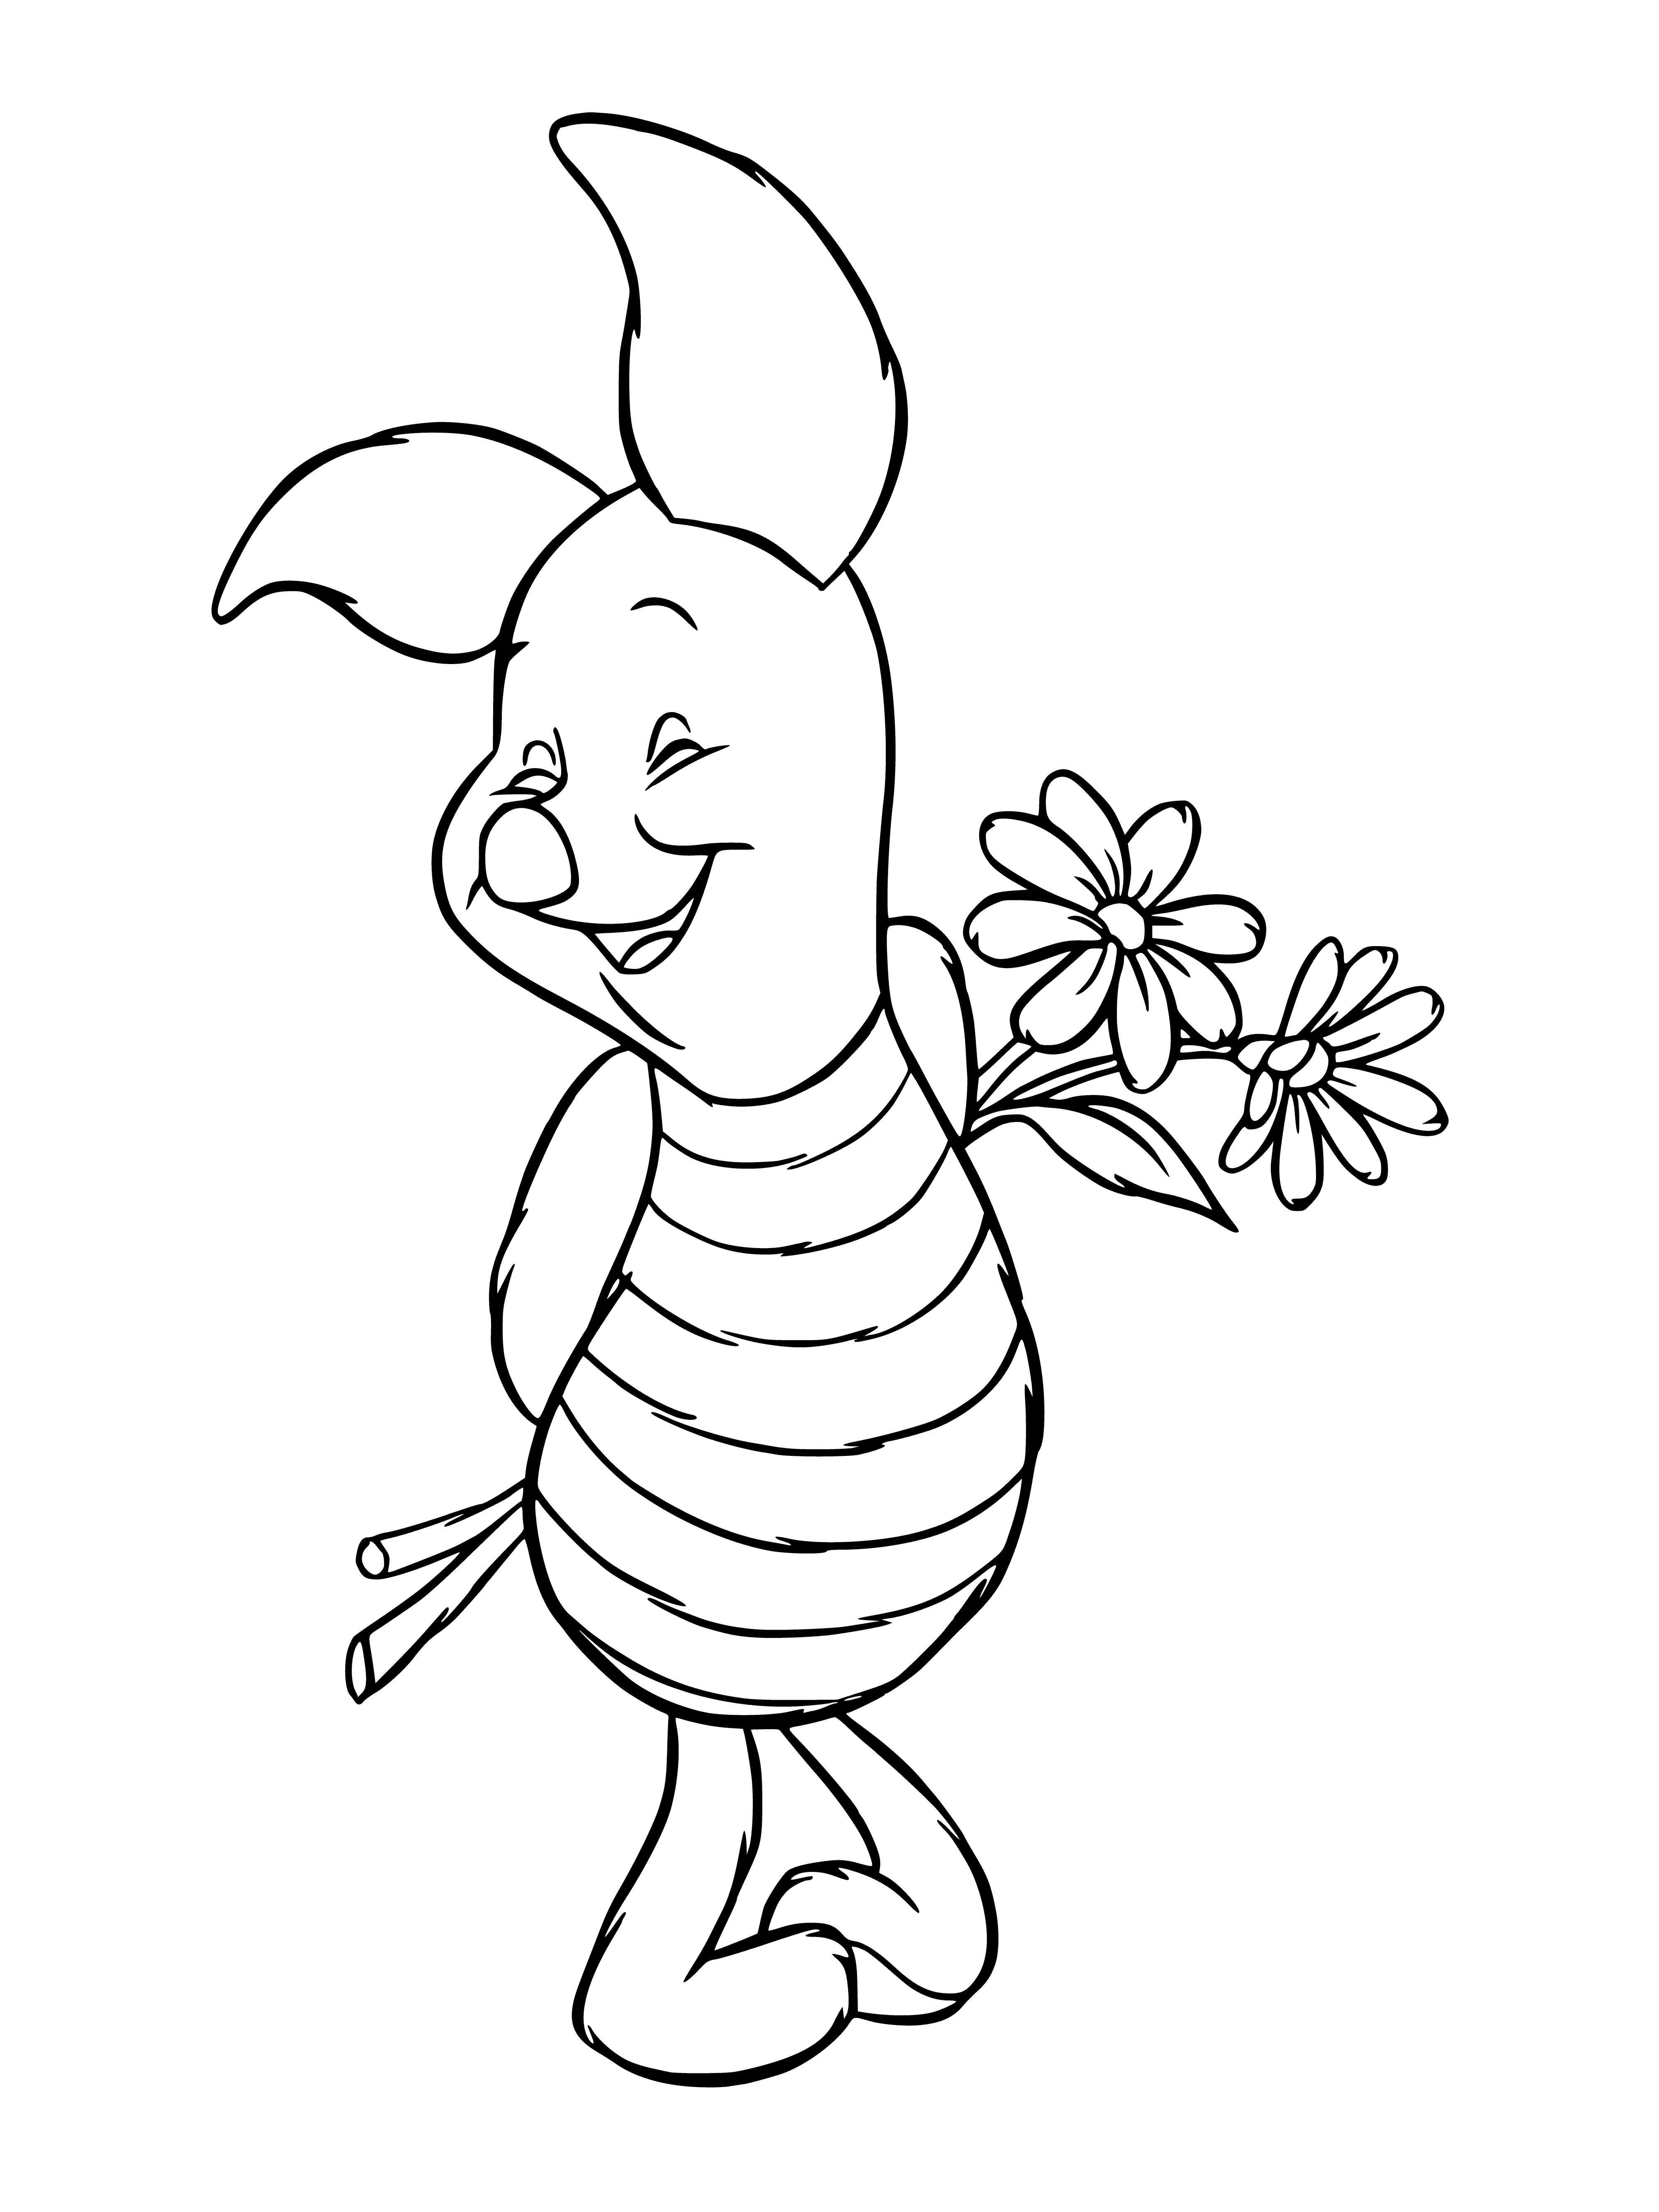 Pig with flowers coloring page